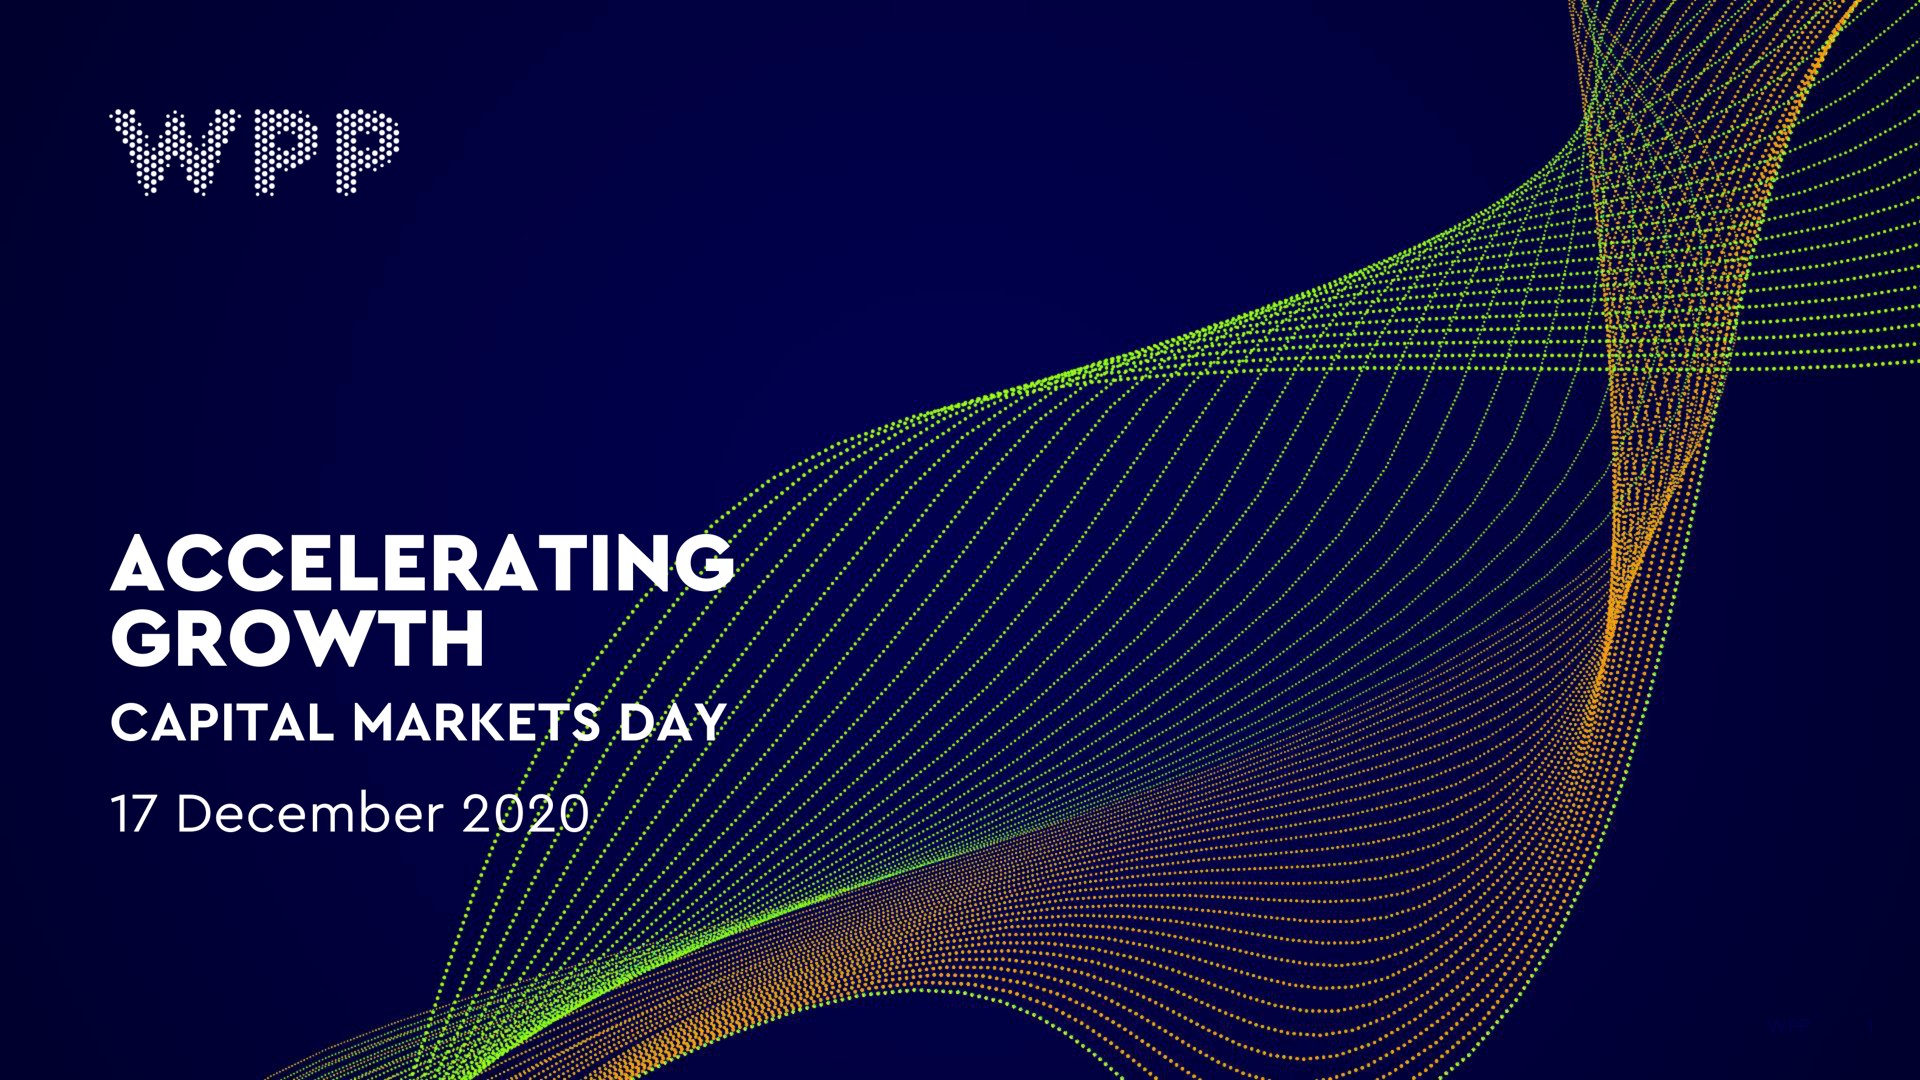 accelerating growth capital markets day | WPP